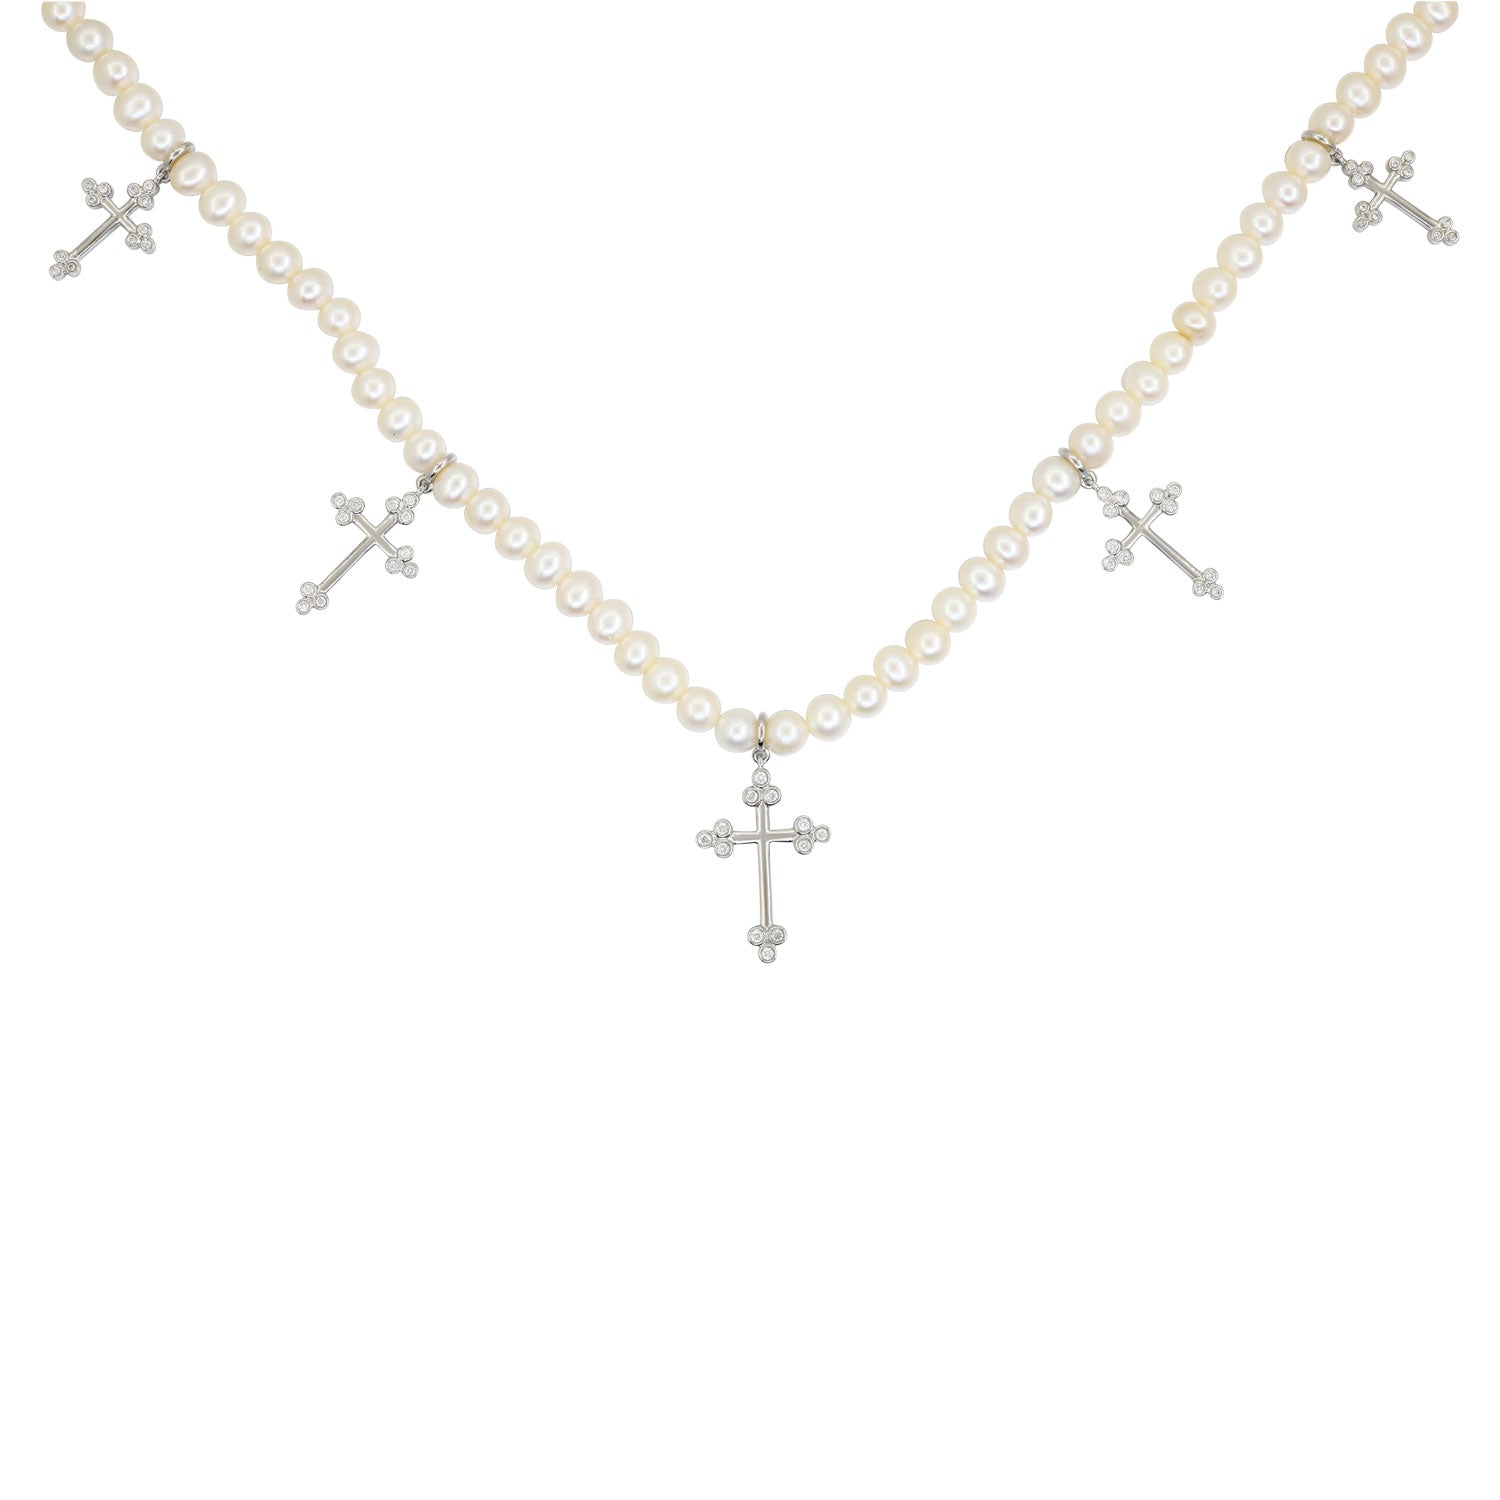 pearl_fifth_crosse_necklace_14k_white_gold_2